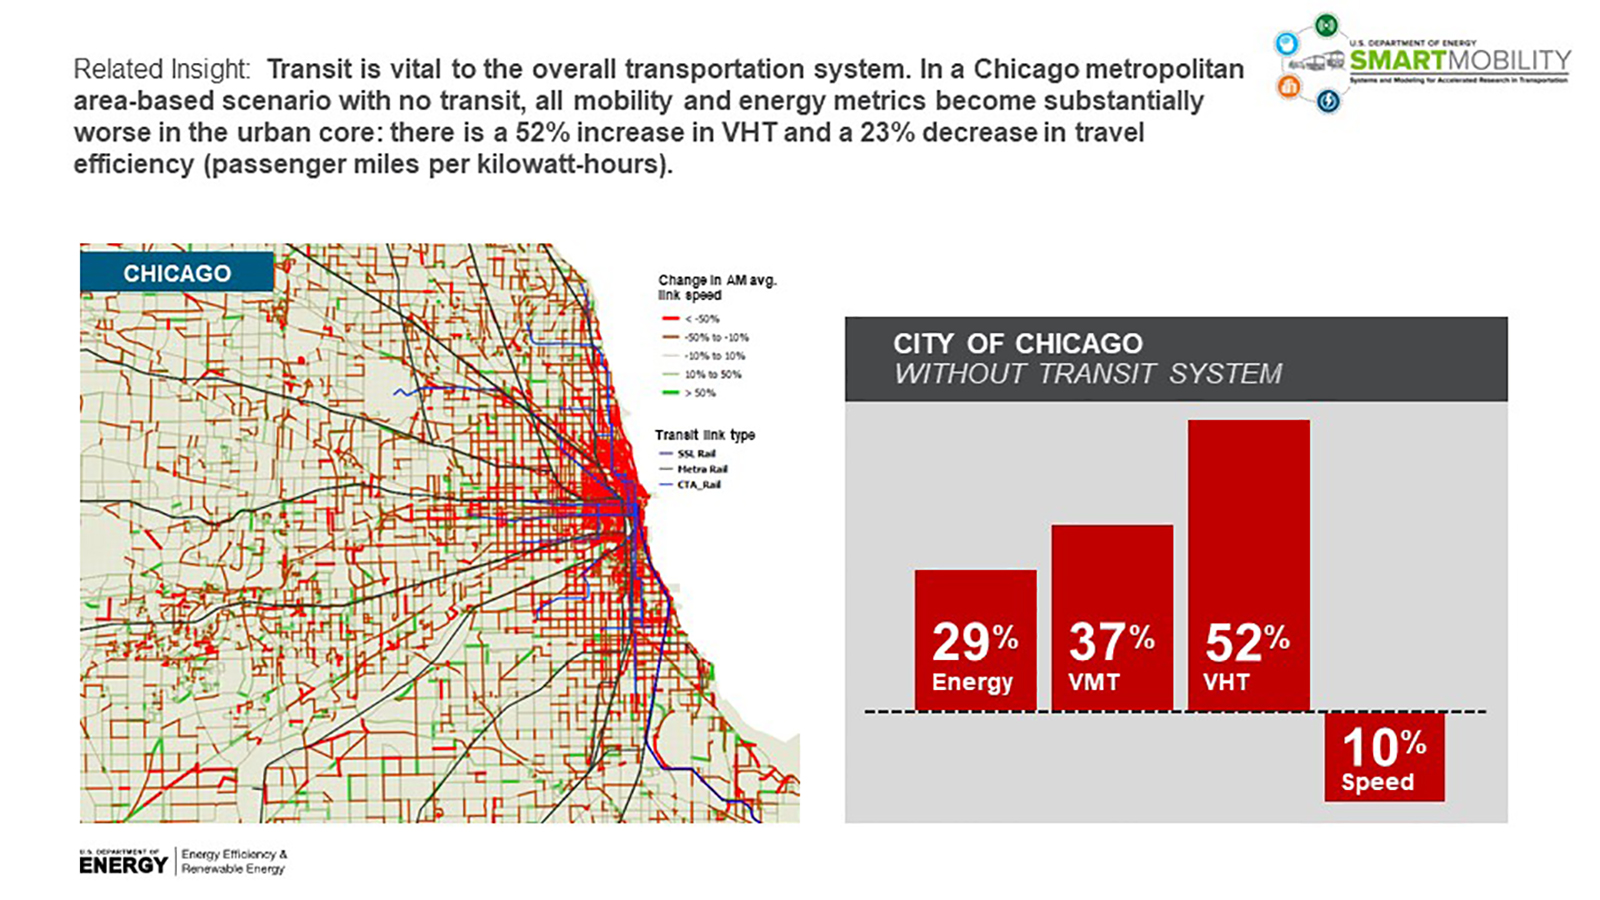 Intersections-Mobility impact in Chicago without transit